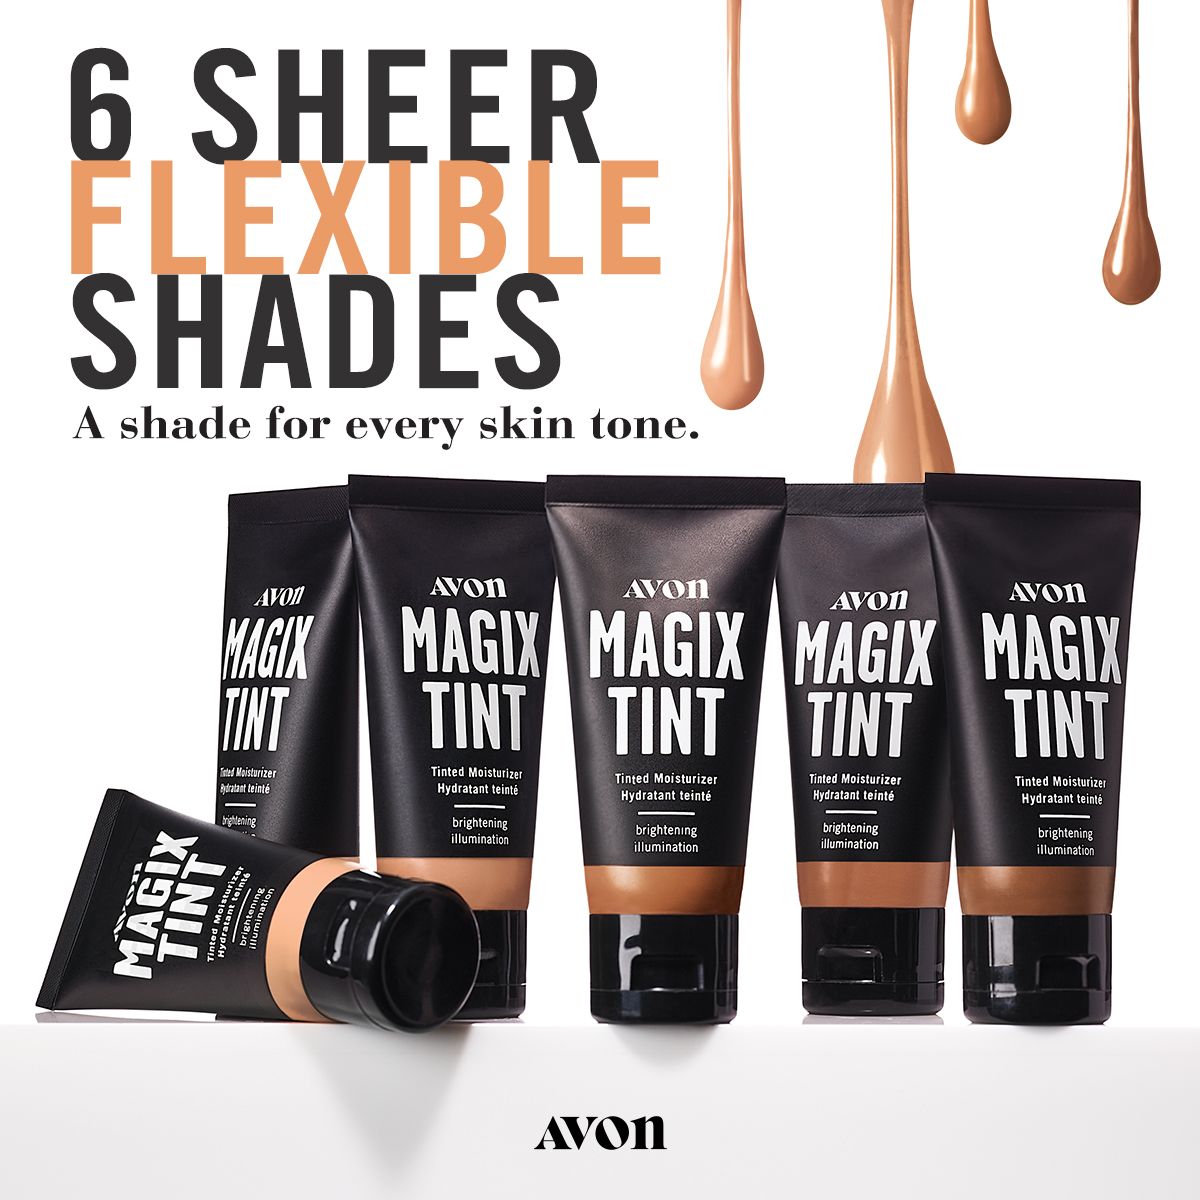 A foundation that moisturizes and protects your skin from damaging sun rays. Avon Magix…